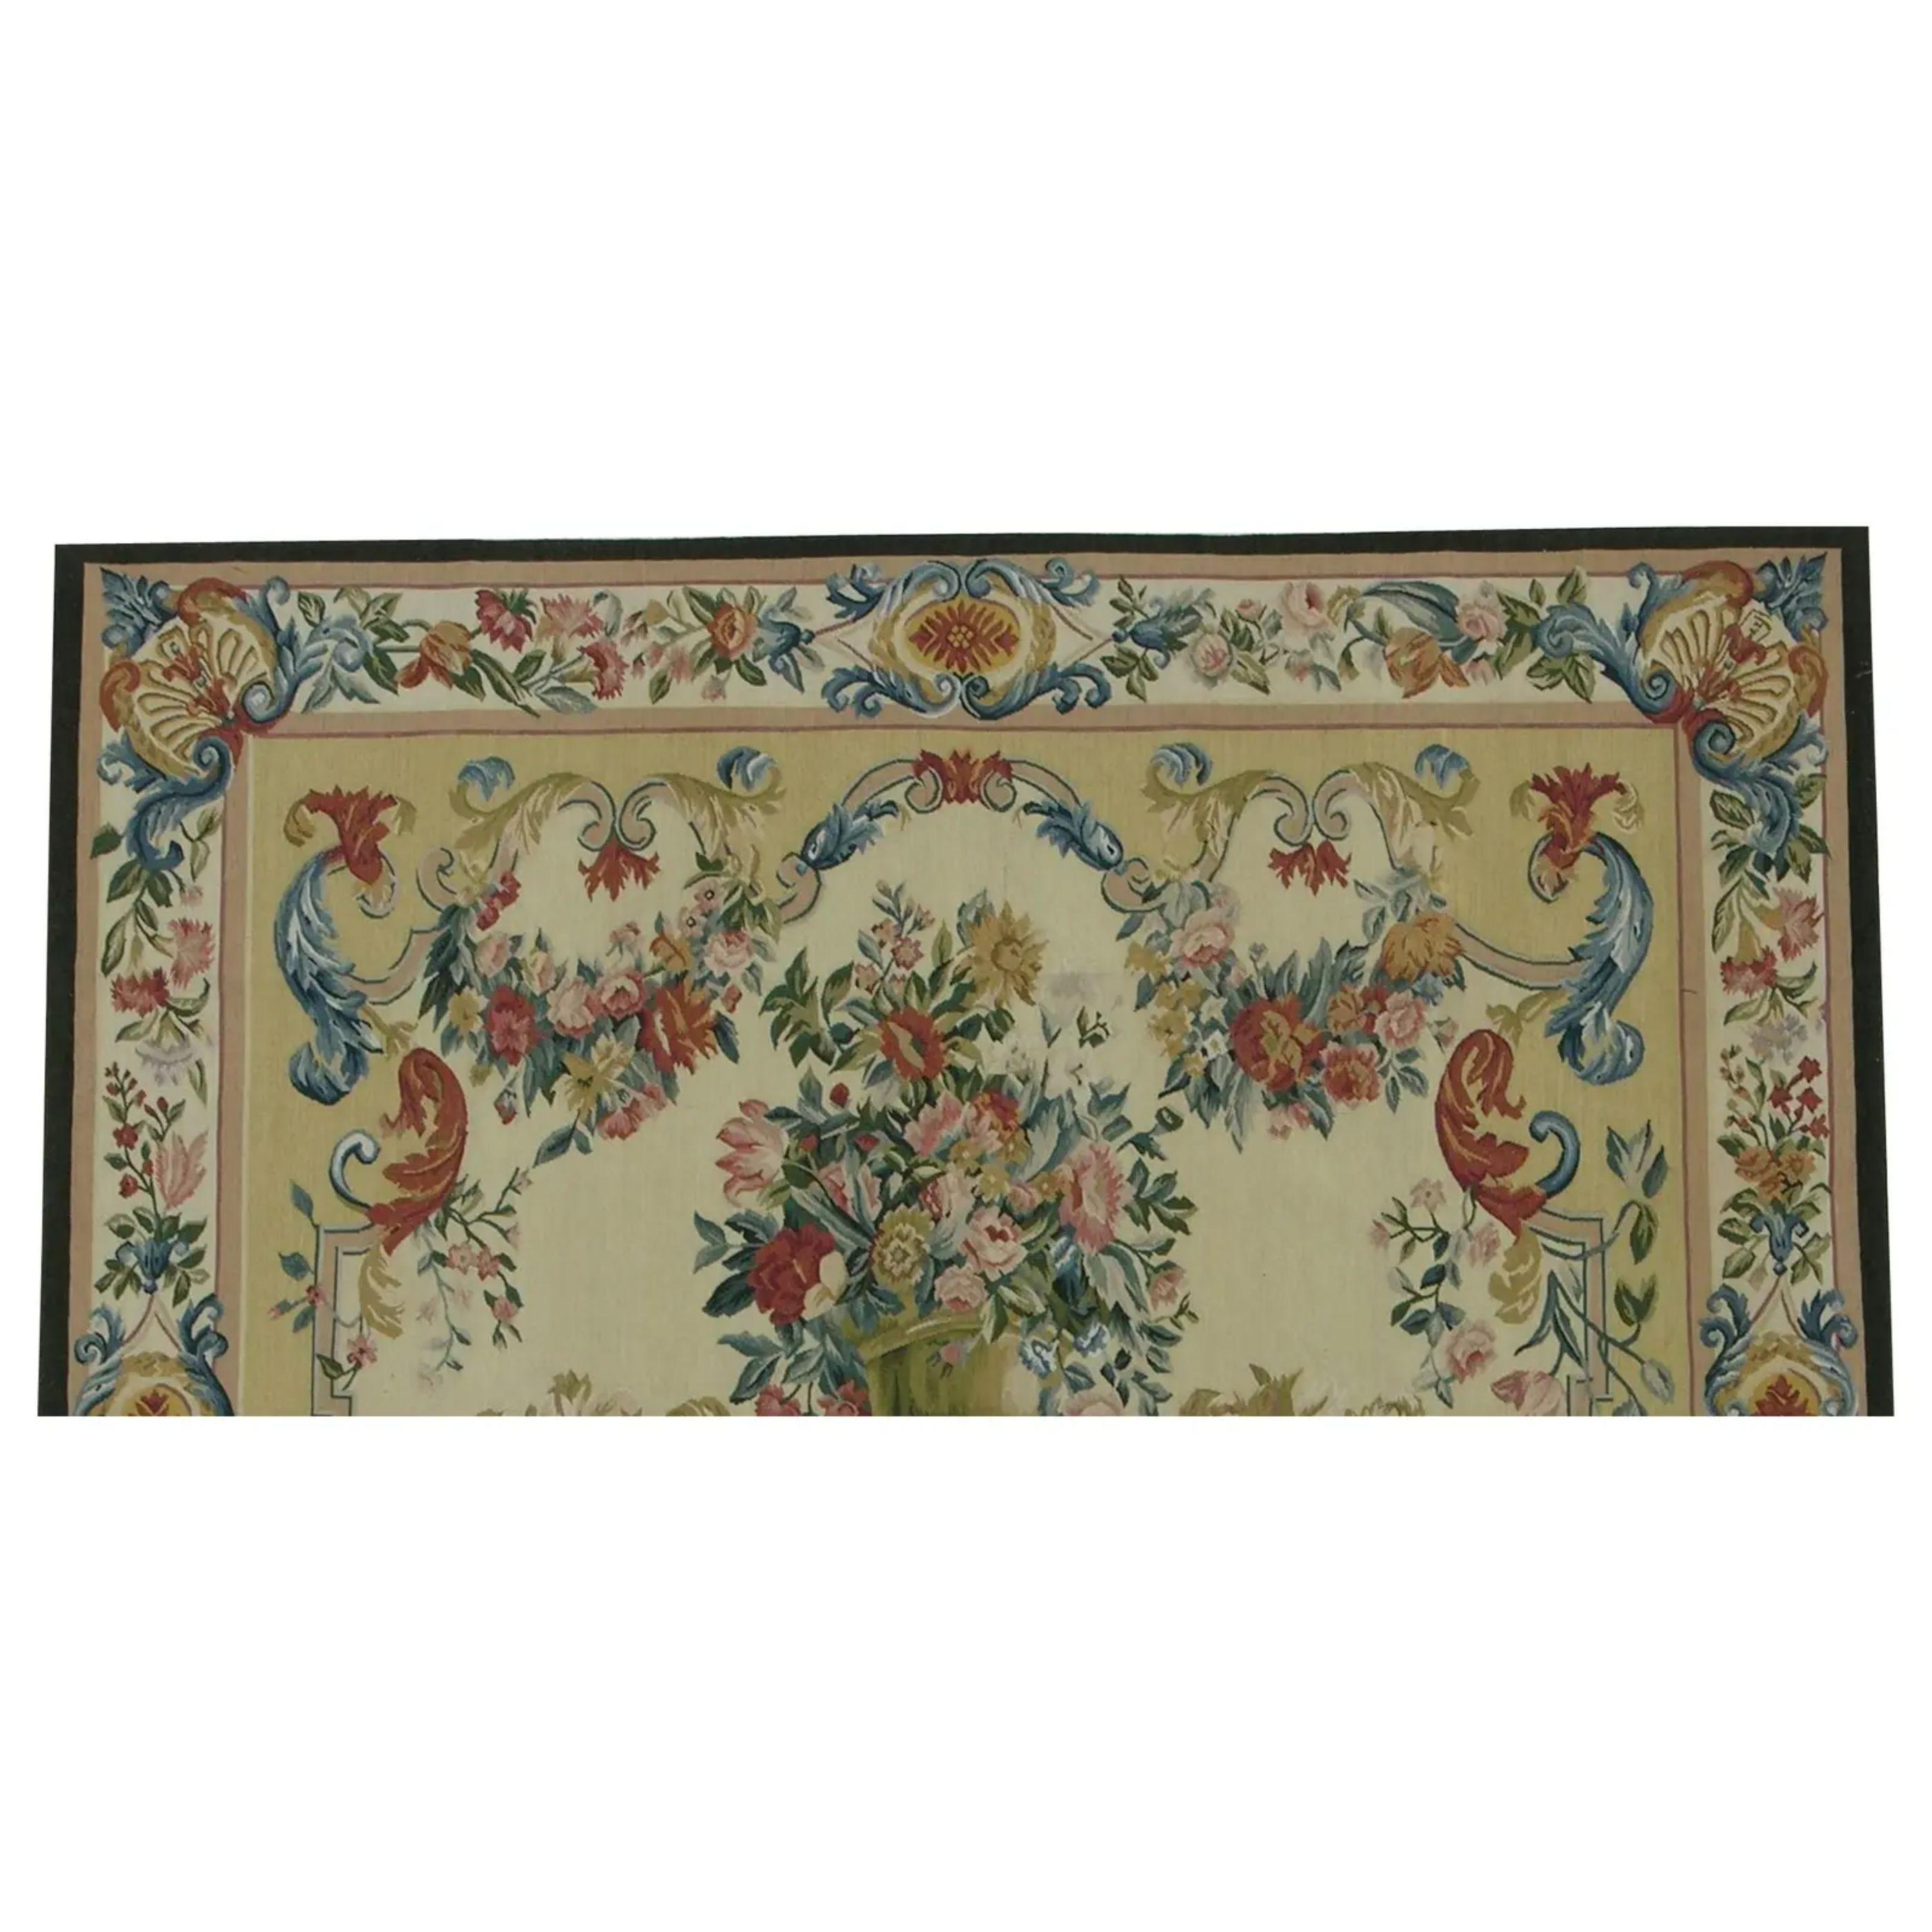 Empire Vintage Floral Tapestry 5.1X5 For Sale